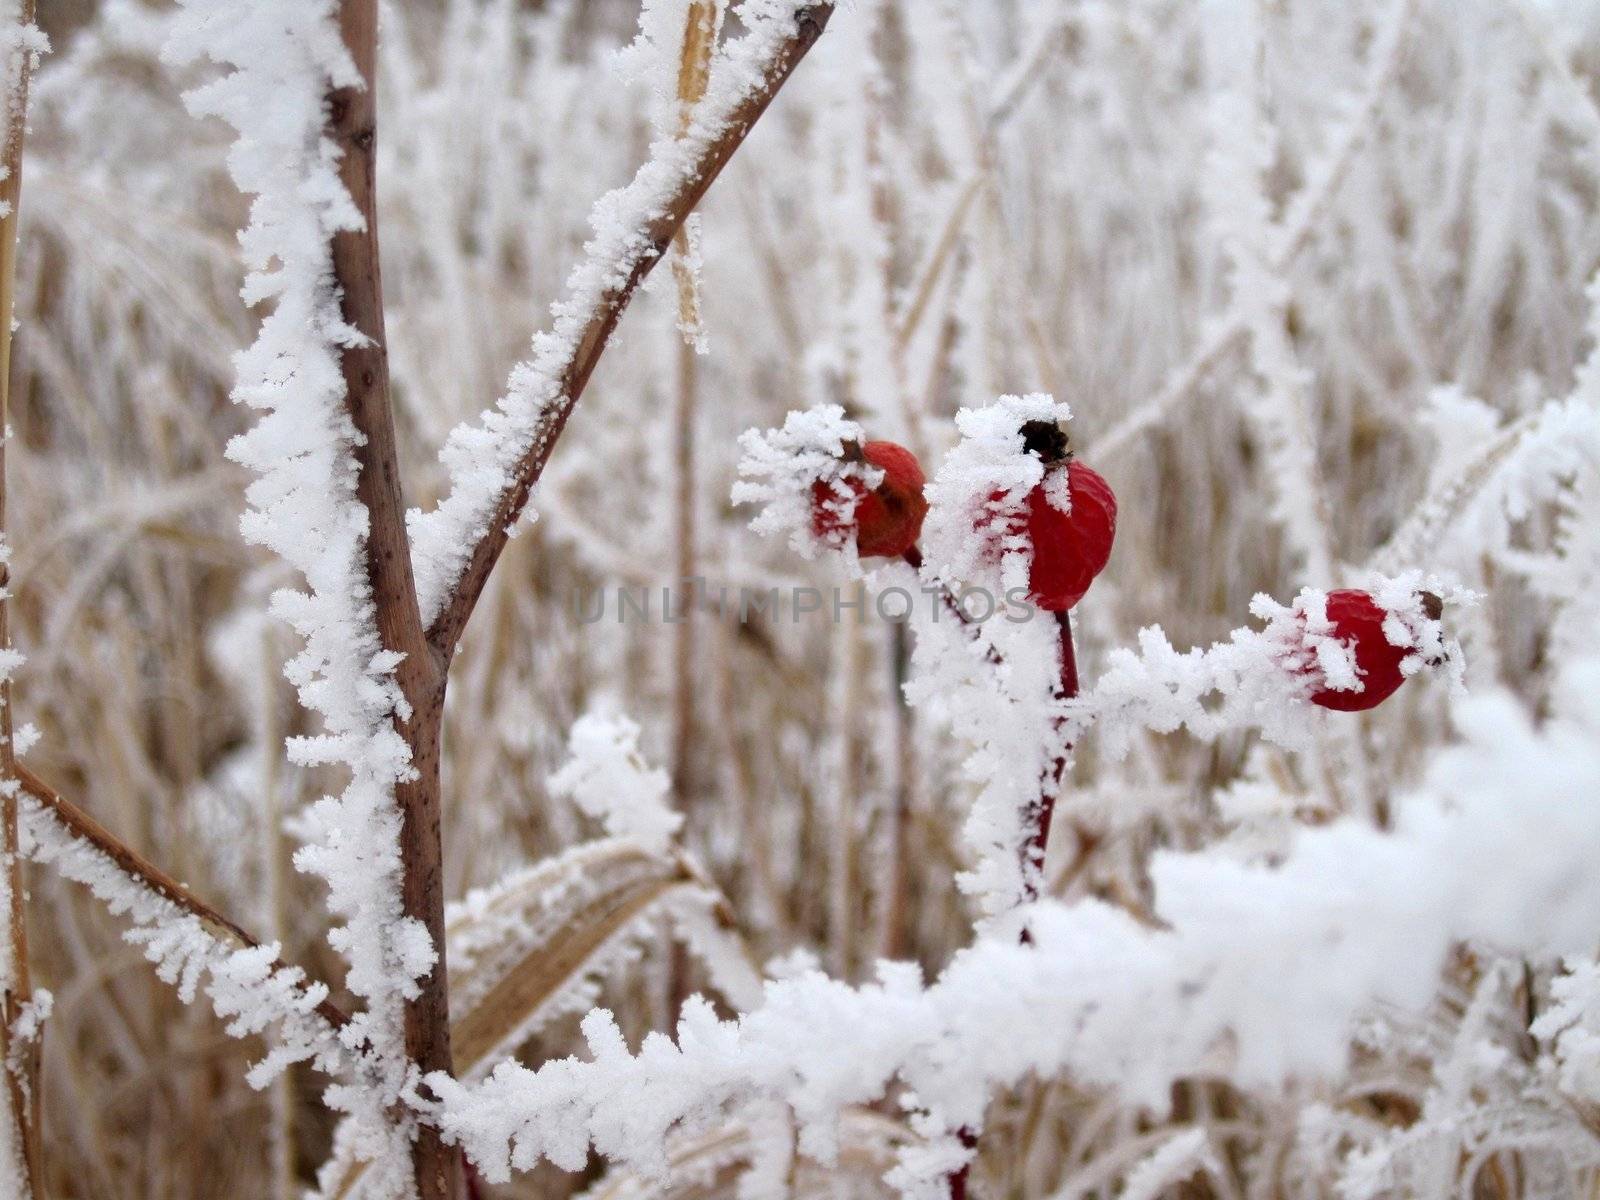 Hoar frost covered red berries amongst tall prairie grass.